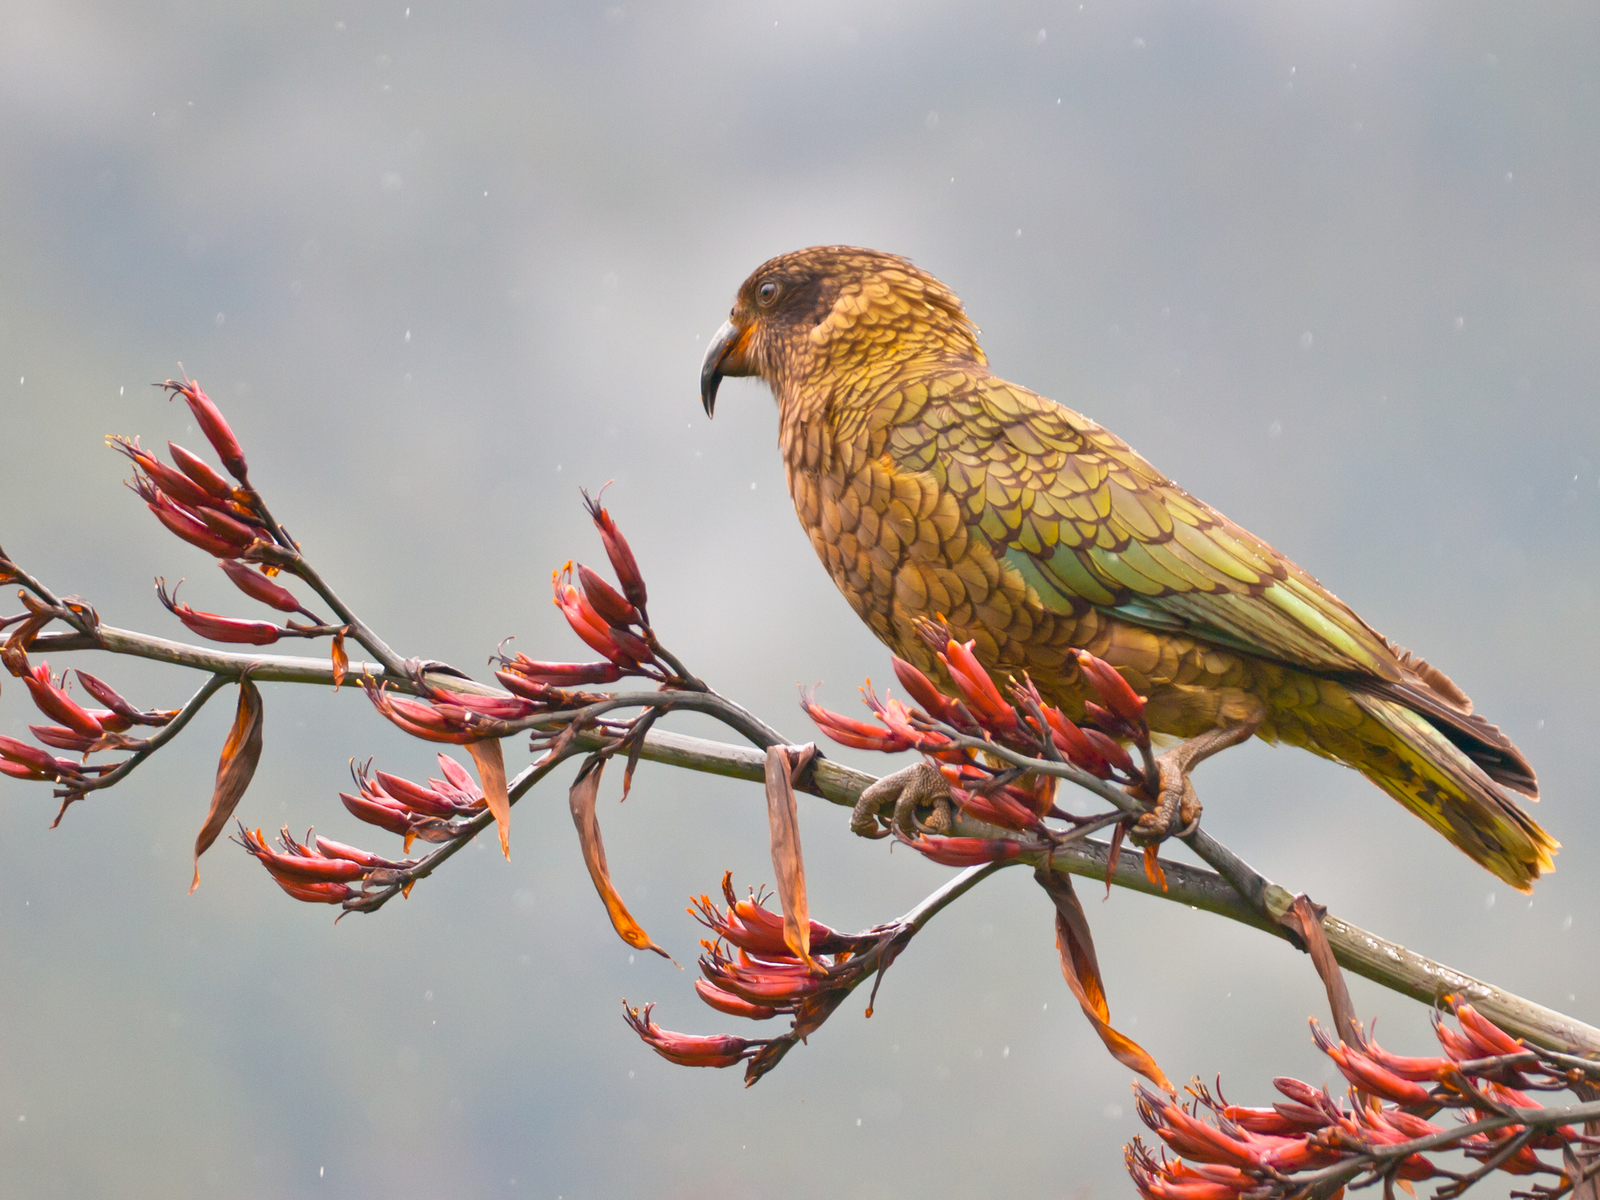 A curious native endemic kea parrot on a New Zealand flax. Image Credit: © Rudmer Zwerver | Dreamstime.com.